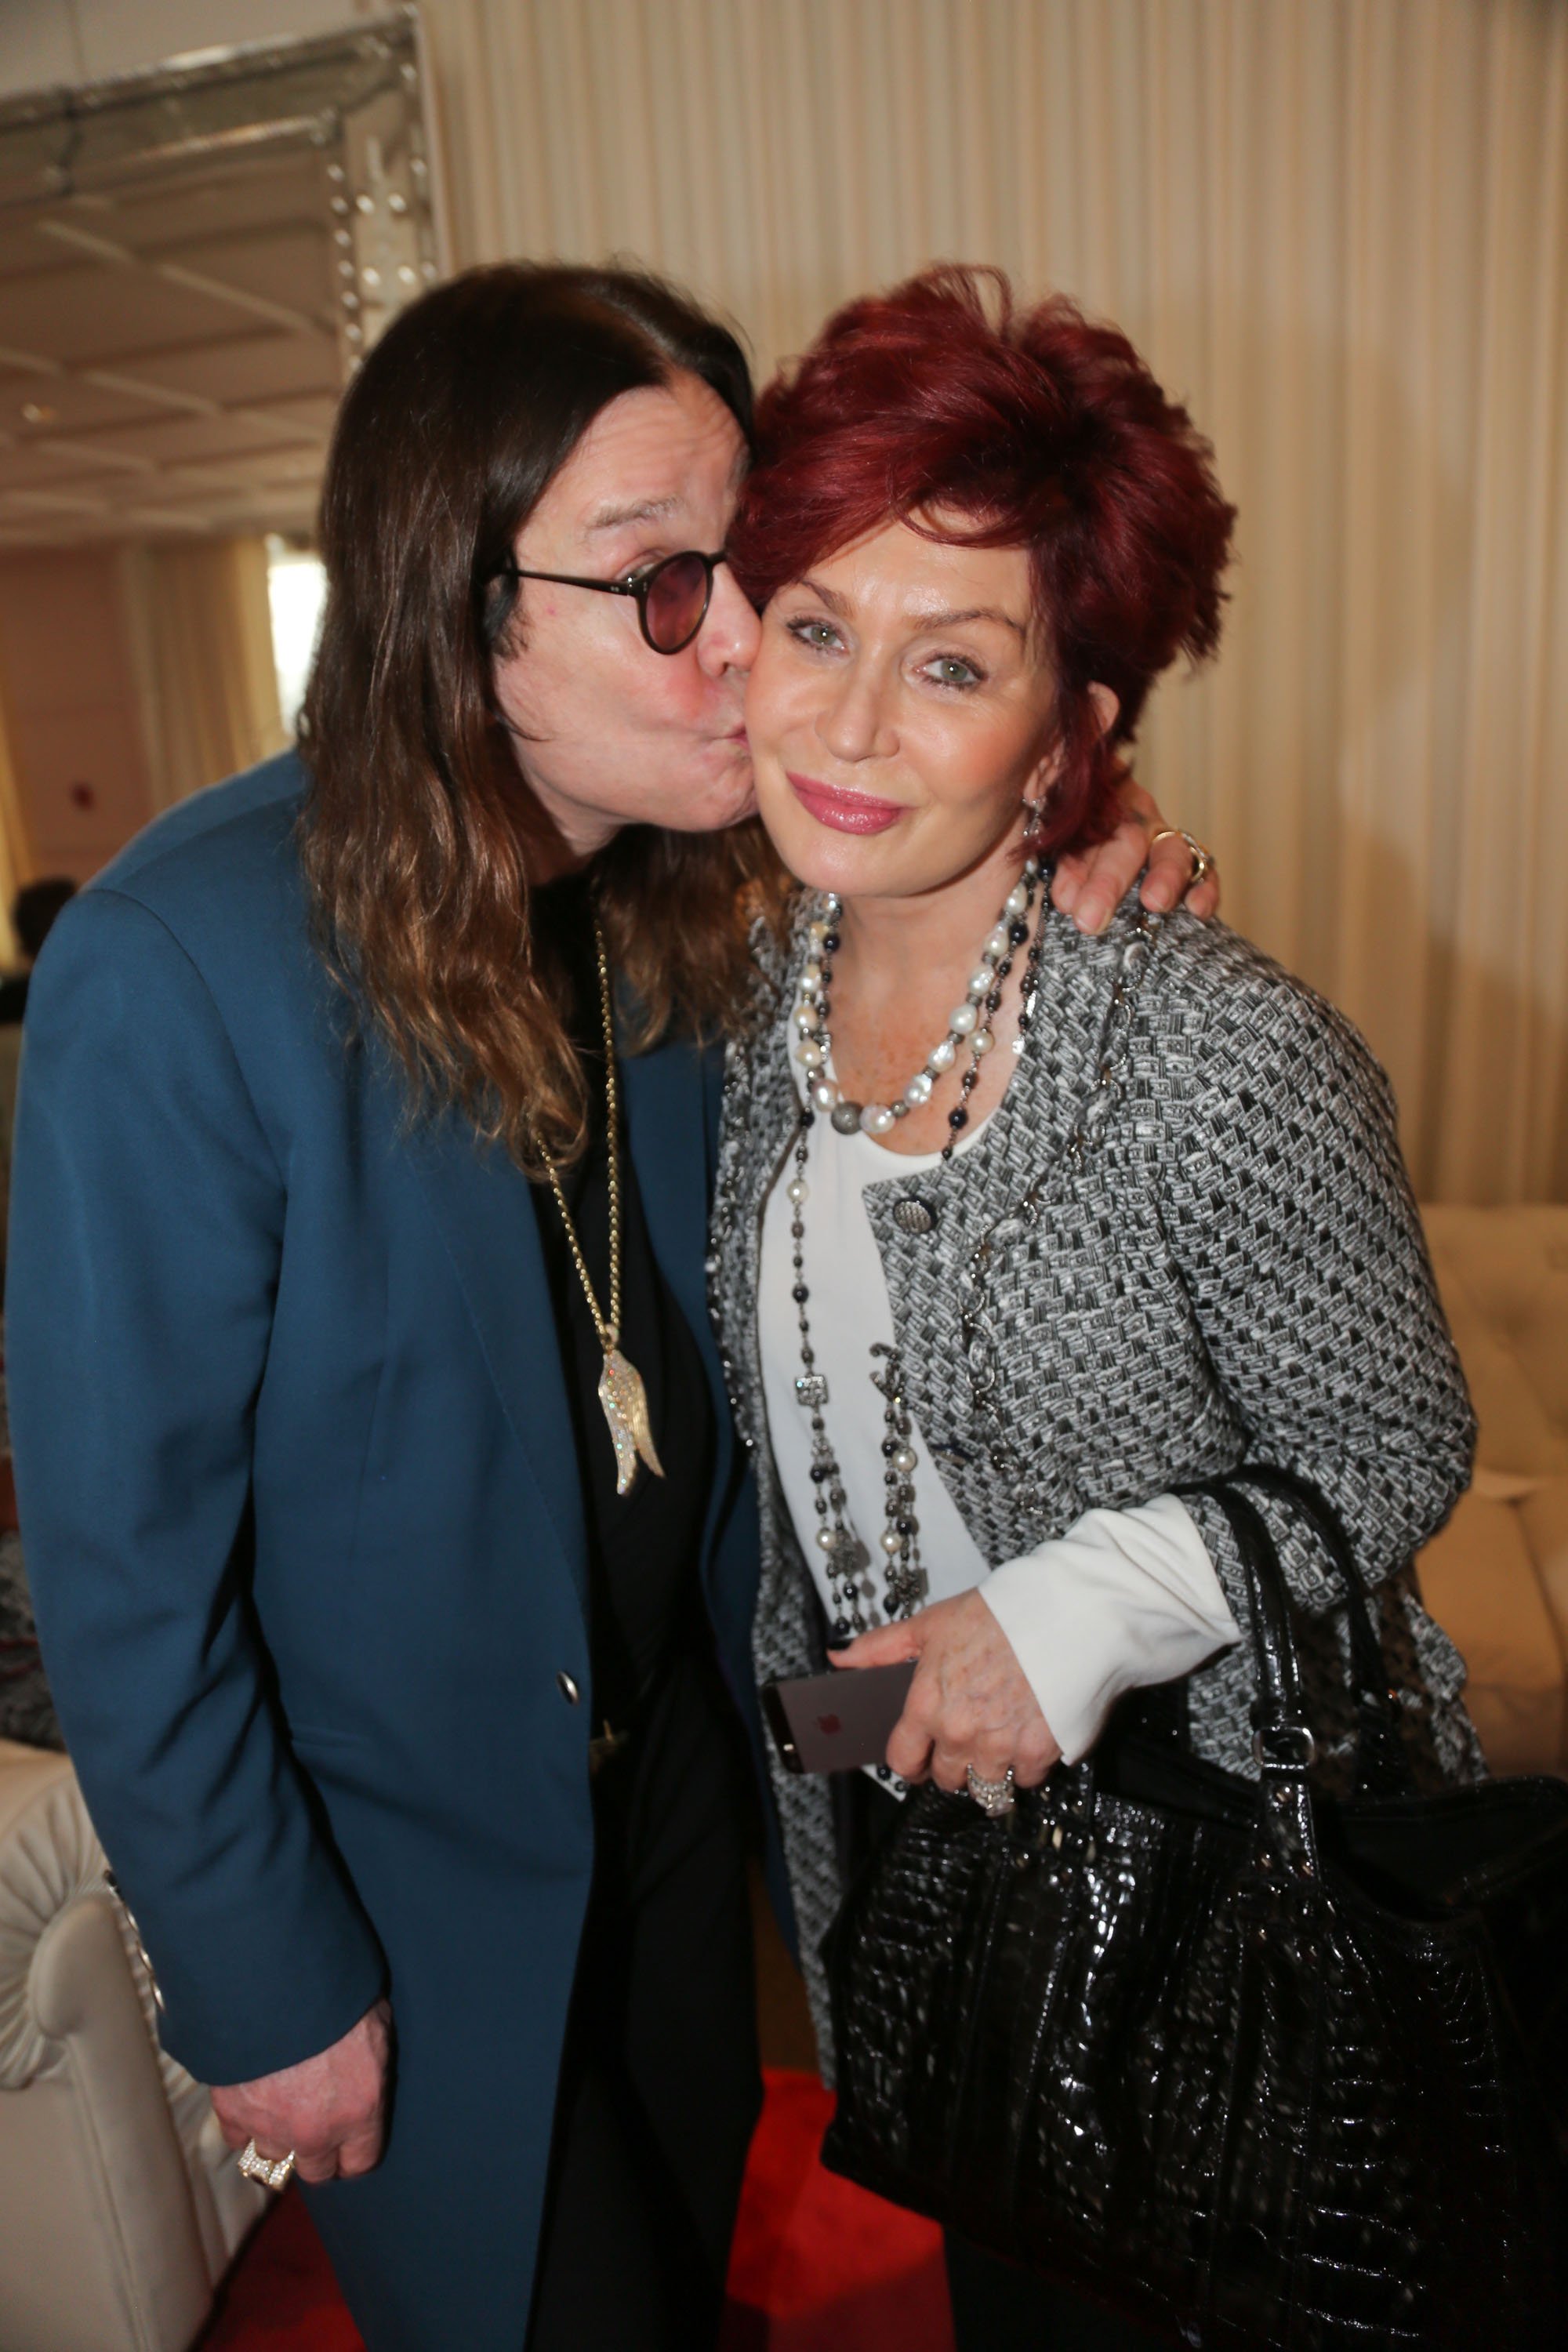 Ozzy Osbourne and his wife Sharon Osbourne attend ASCAP's 2014 Grammy Nominee Brunch at SLS Hotel on January 25, 2014, in Beverly Hills, California. | Source: Getty Images